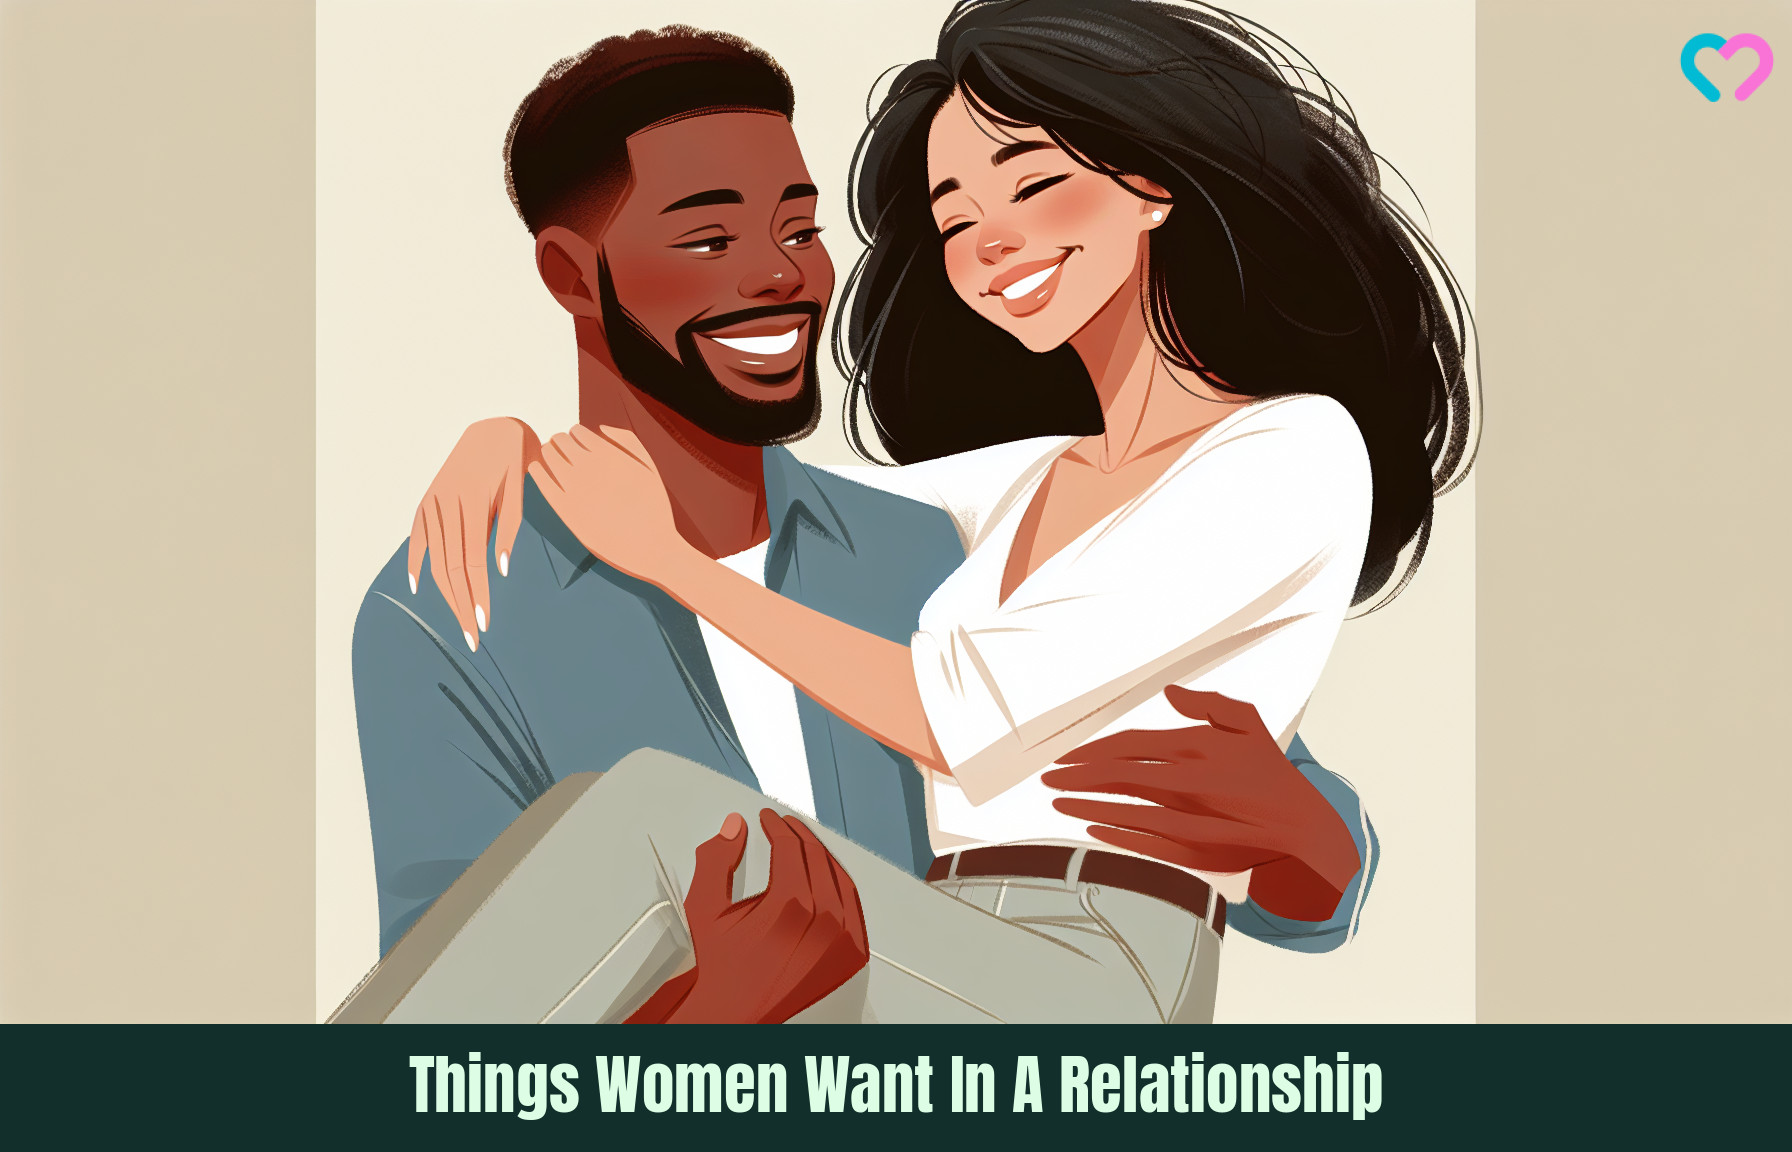 Women Want In A Relationship_illustration